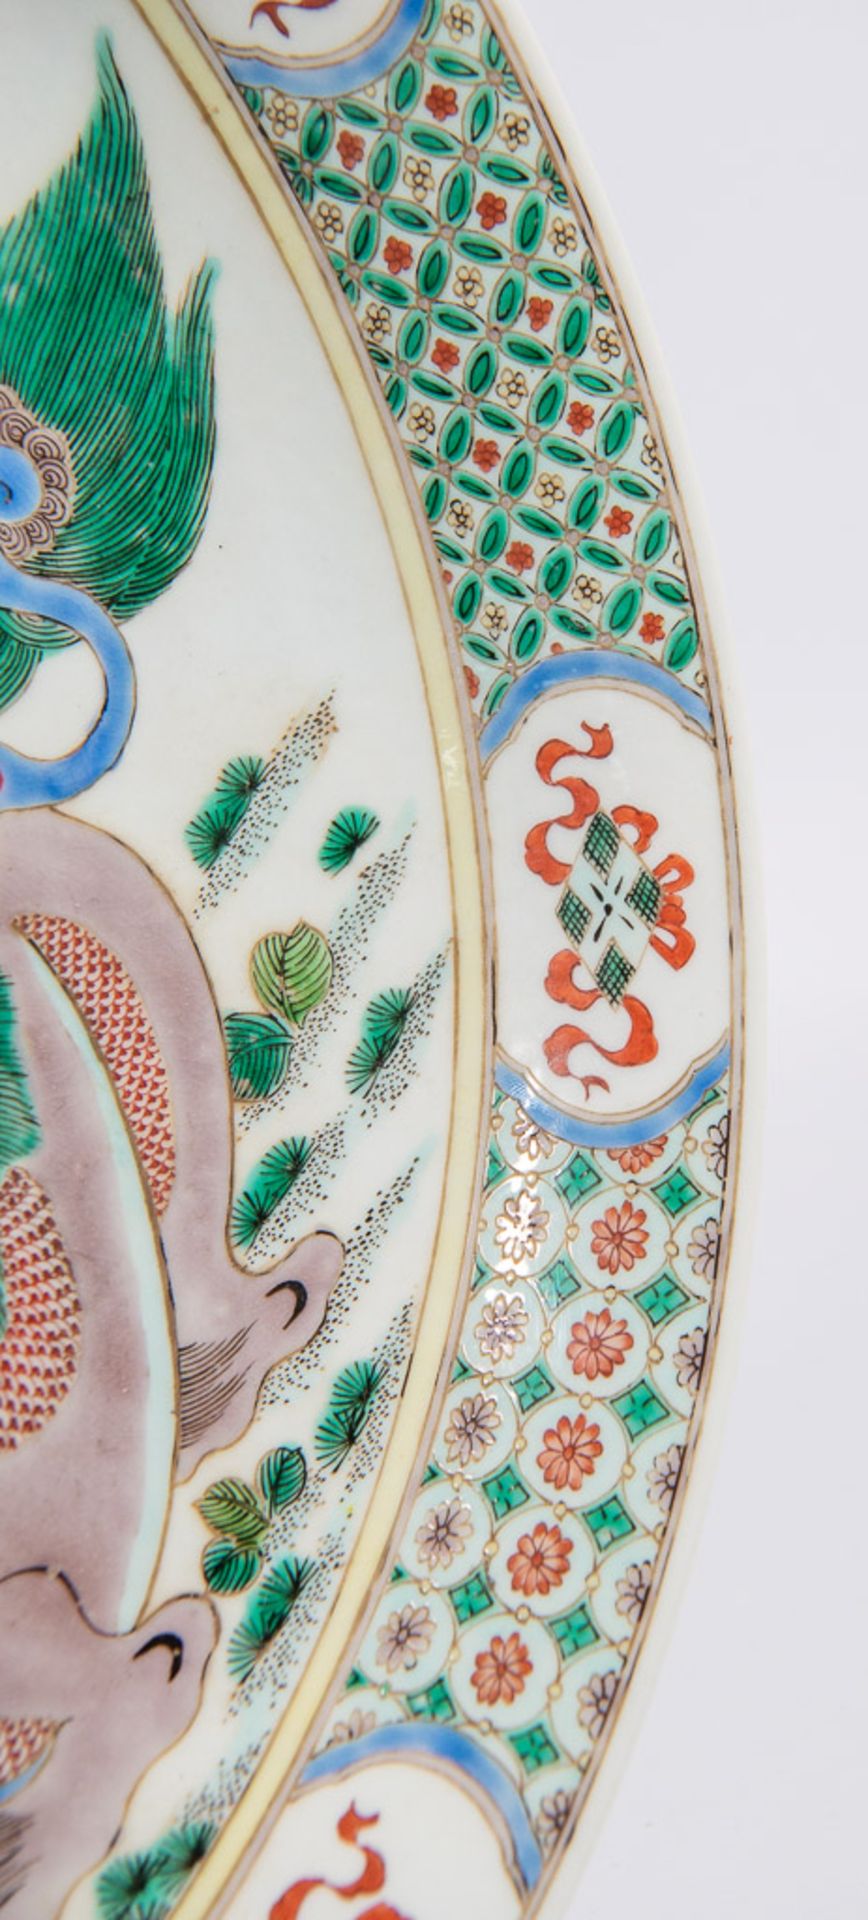 Display plate Wucai with dragons - Image 8 of 12